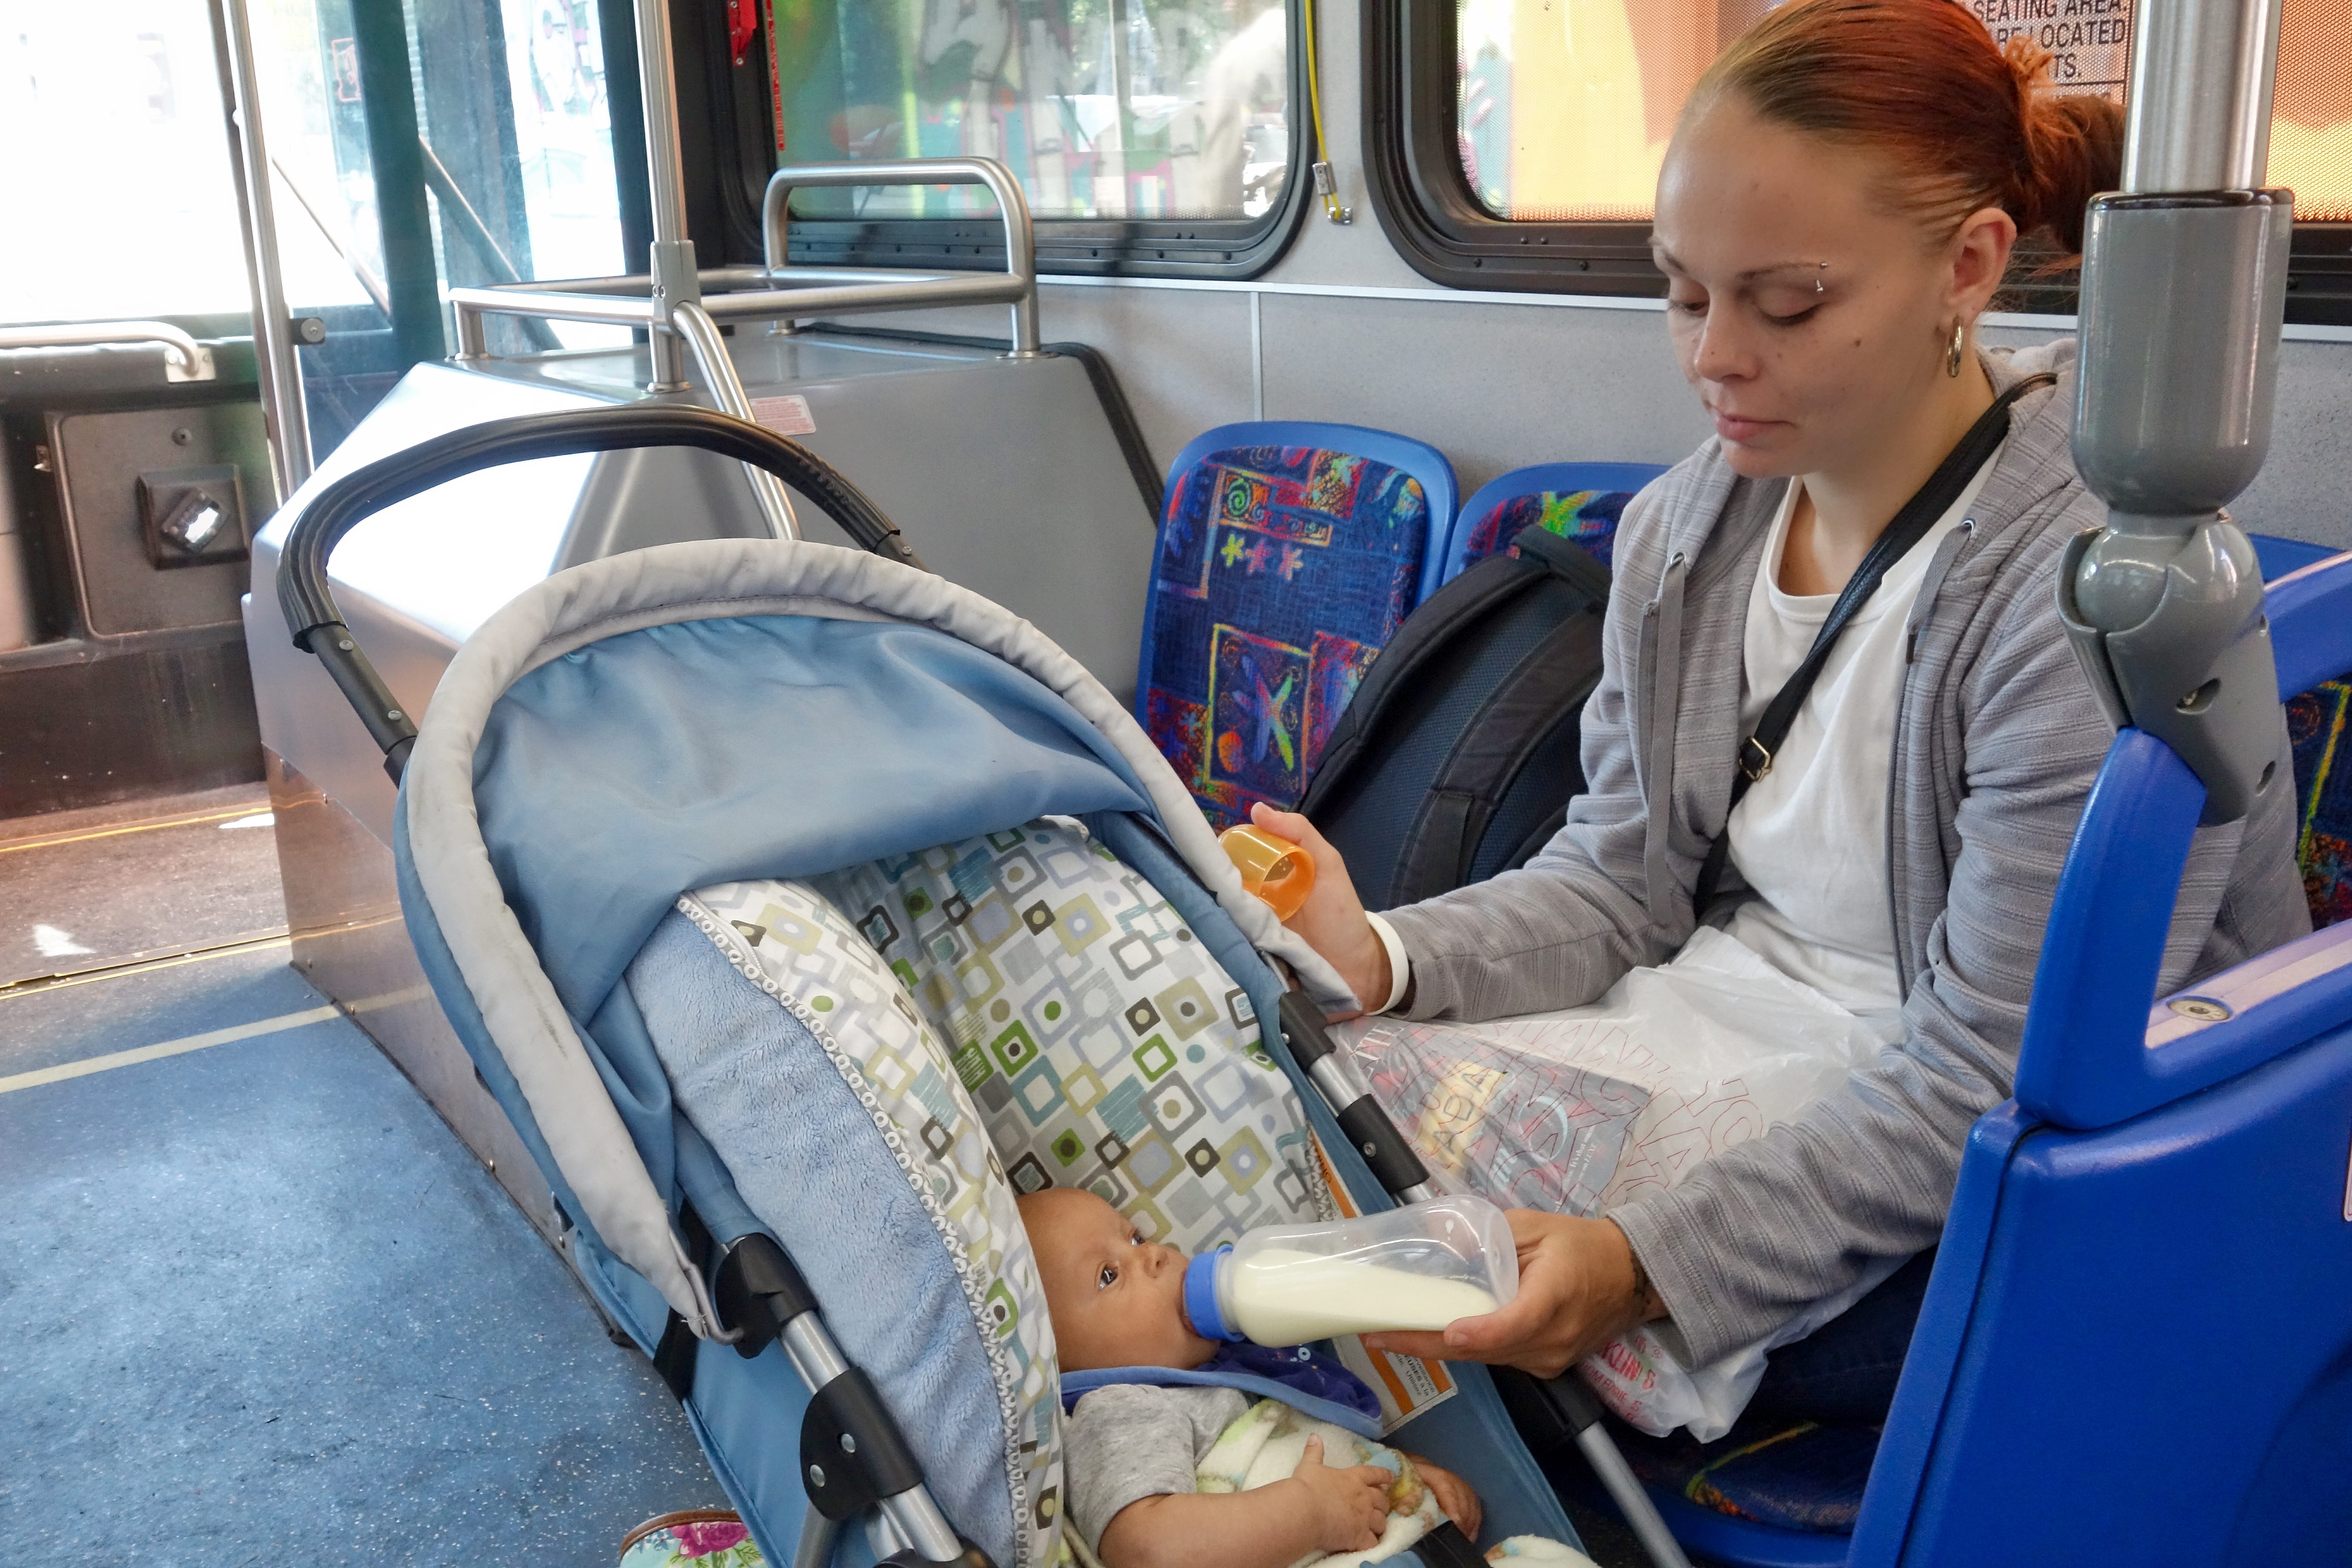 Tia Hosler, along with her son, Marsean, rides the bus home from treatment in Fort Wayne, Indiana. Every day Hosler, who's recovering from addiction, juggles bus schedules, doctors appointments, random drug testing and job hunting.